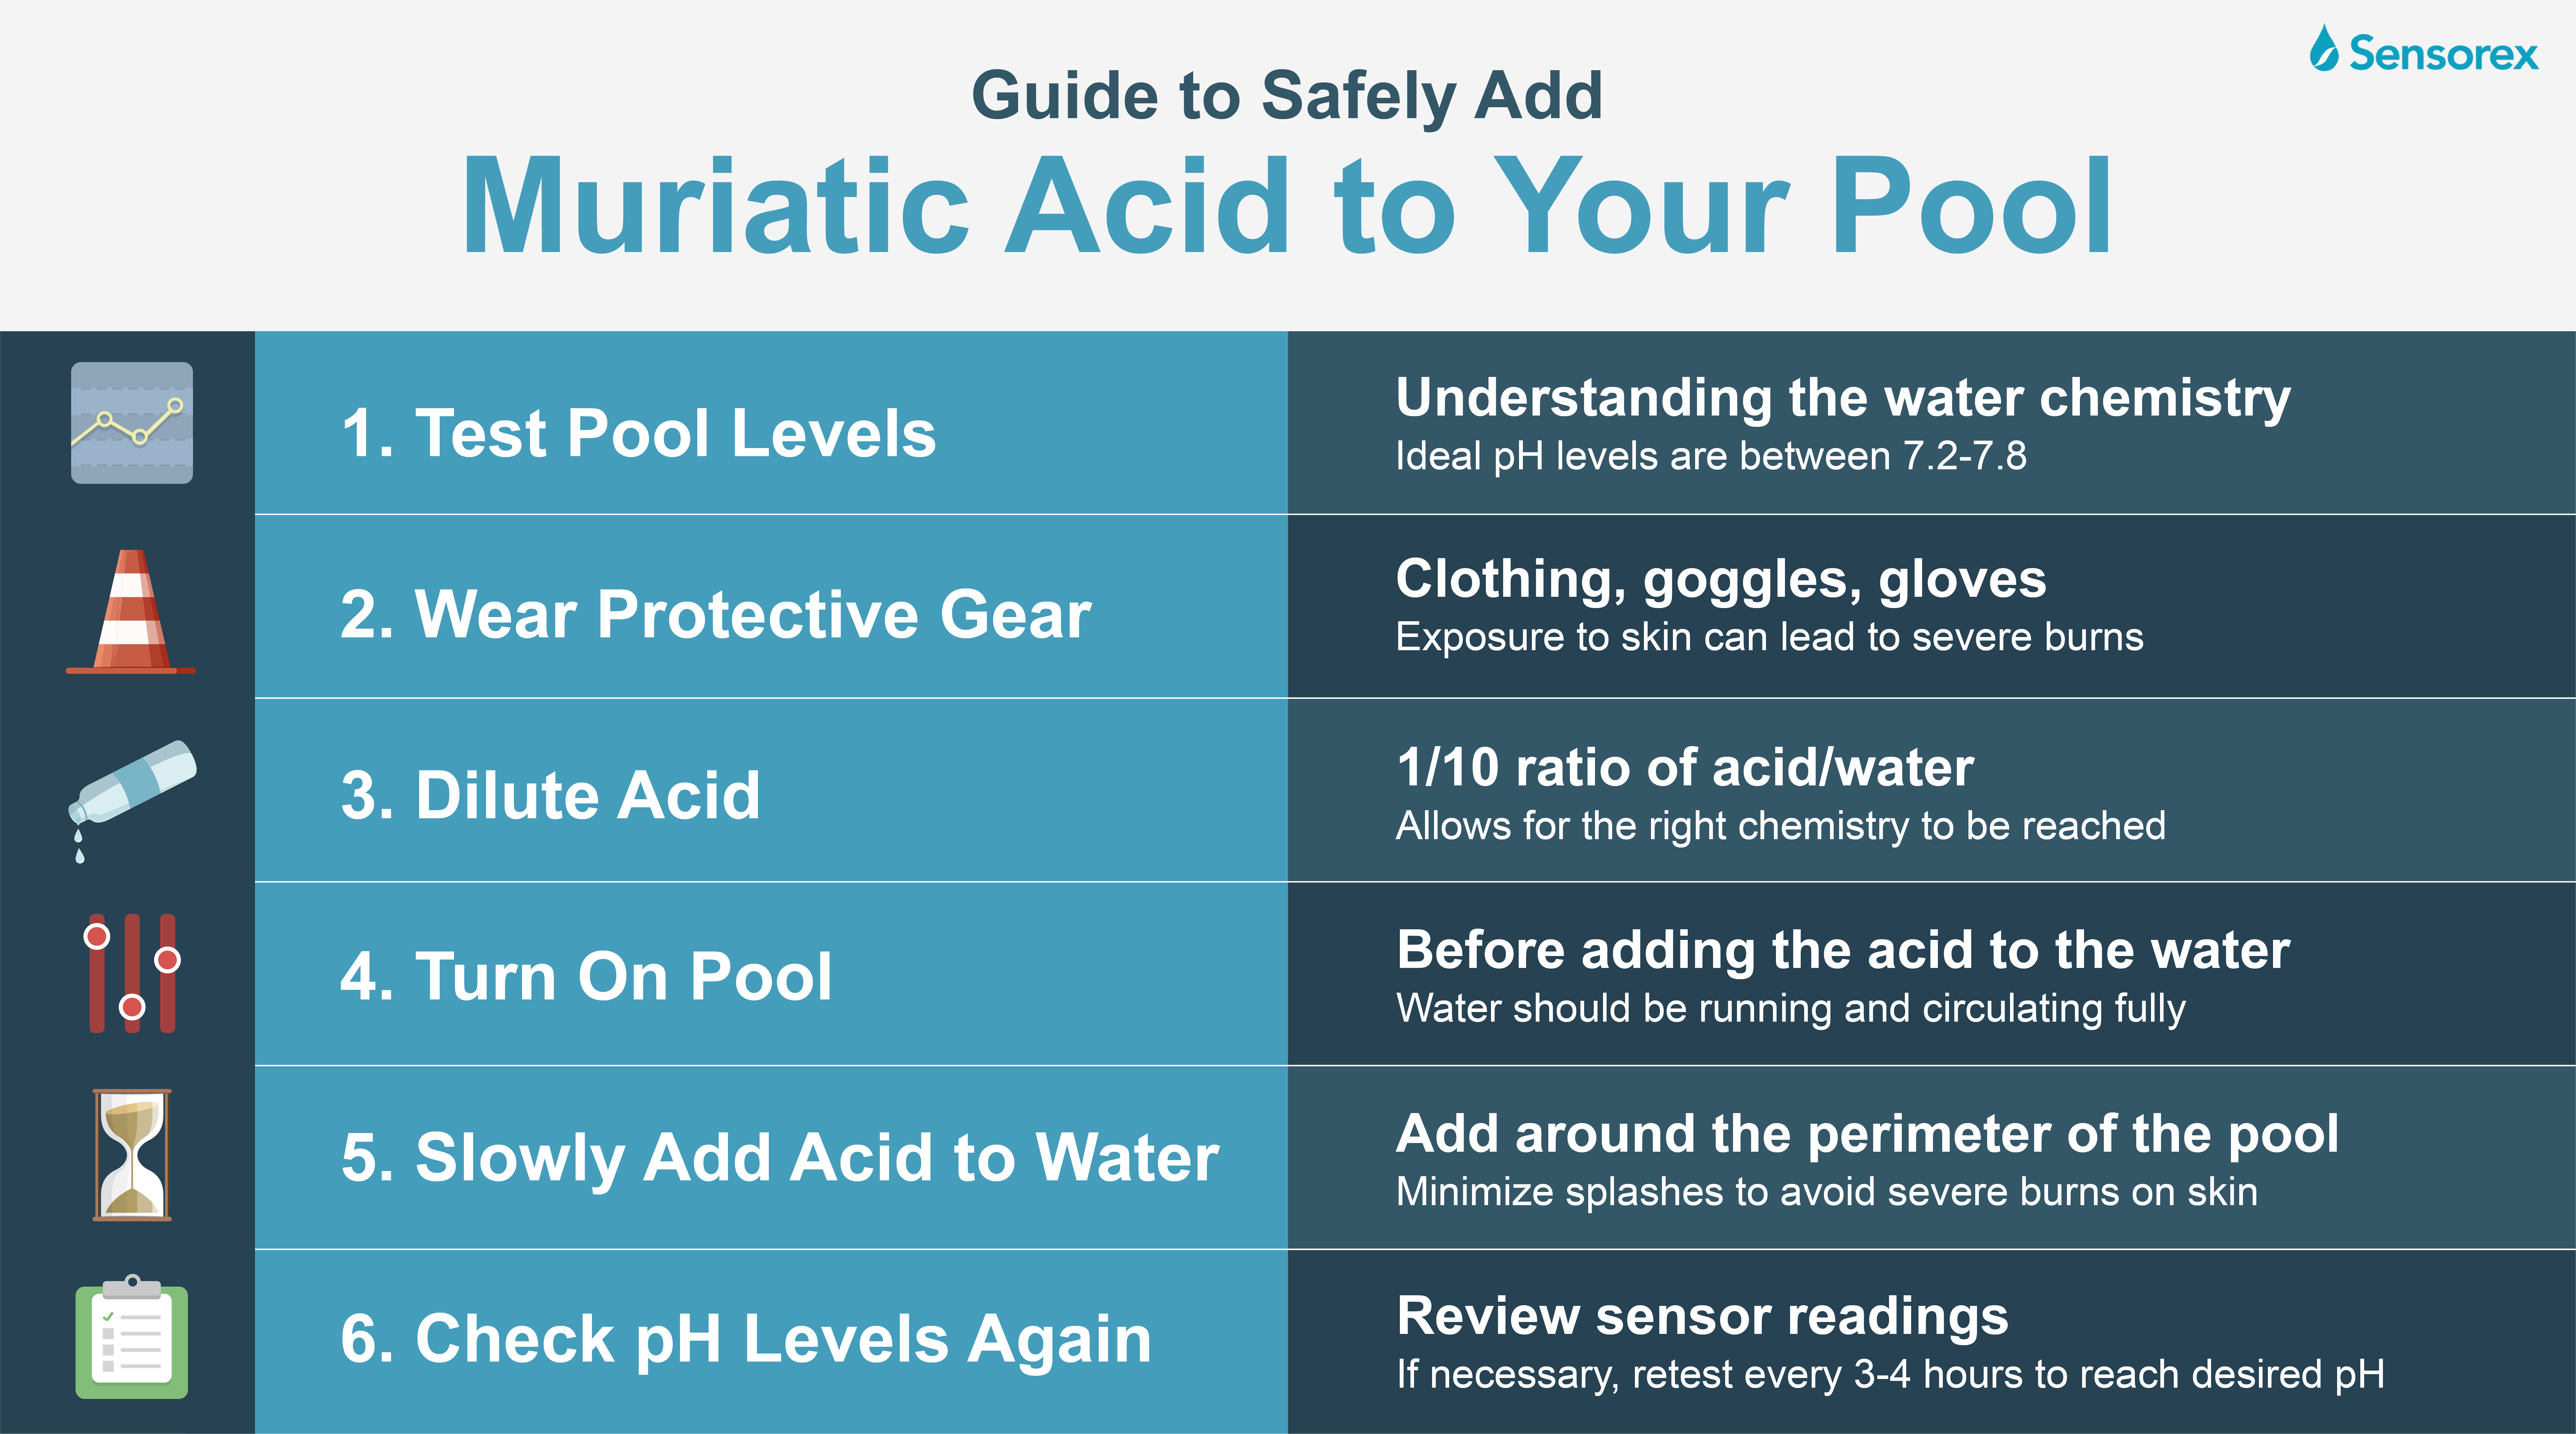 Guide to Safely Add Muriatic Acid to Your Pool Infographic